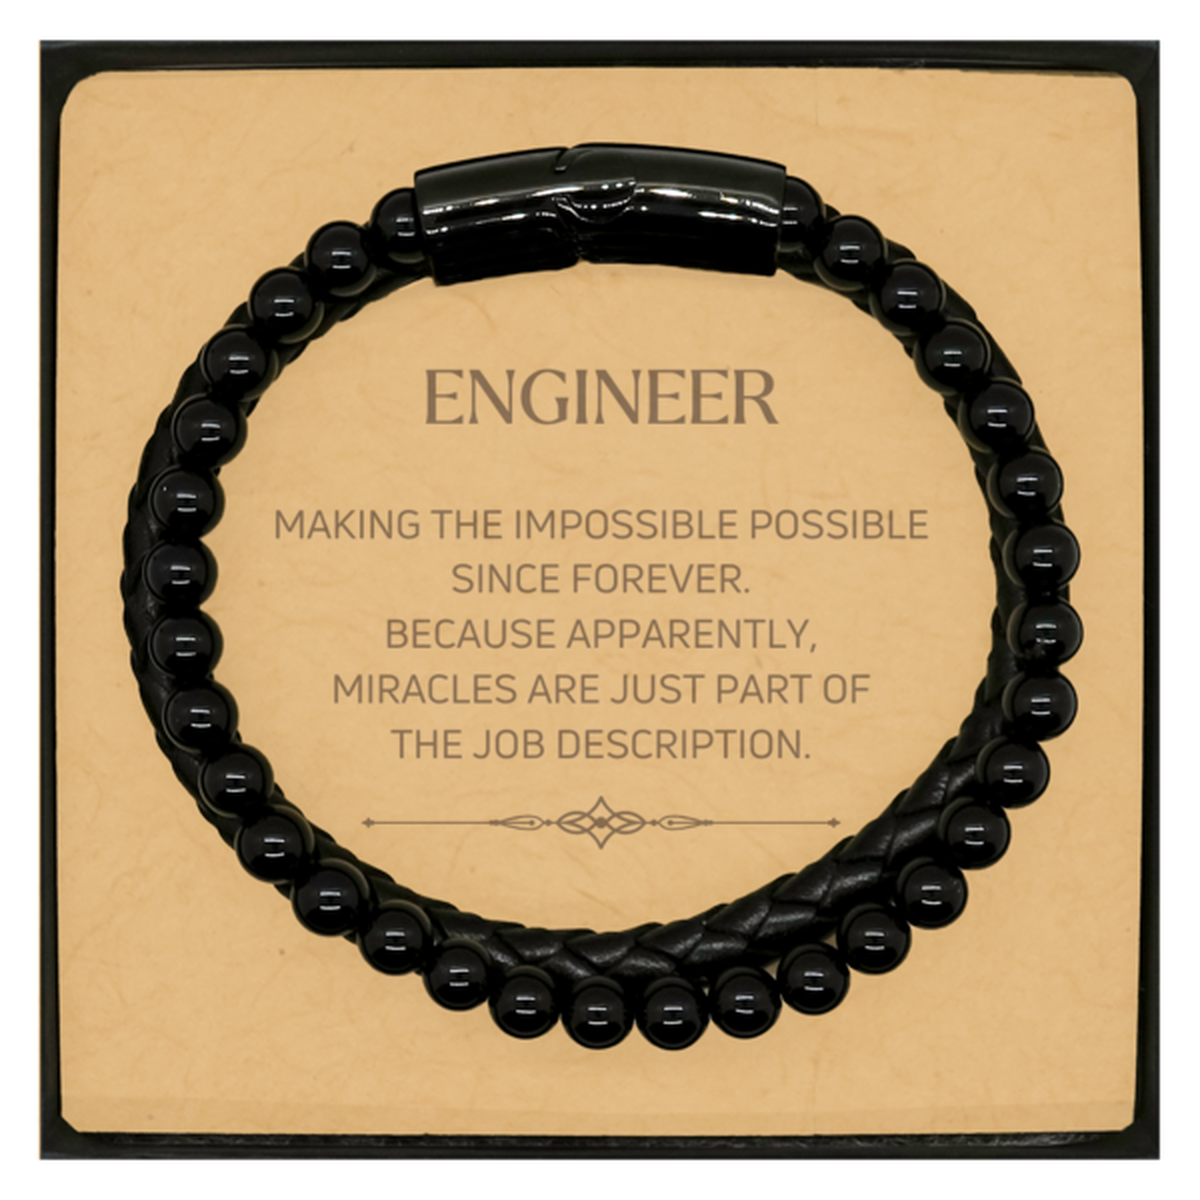 Funny Engineer Gifts, Miracles are just part of the job description, Inspirational Birthday Christmas Stone Leather Bracelets For Engineer, Men, Women, Coworkers, Friends, Boss